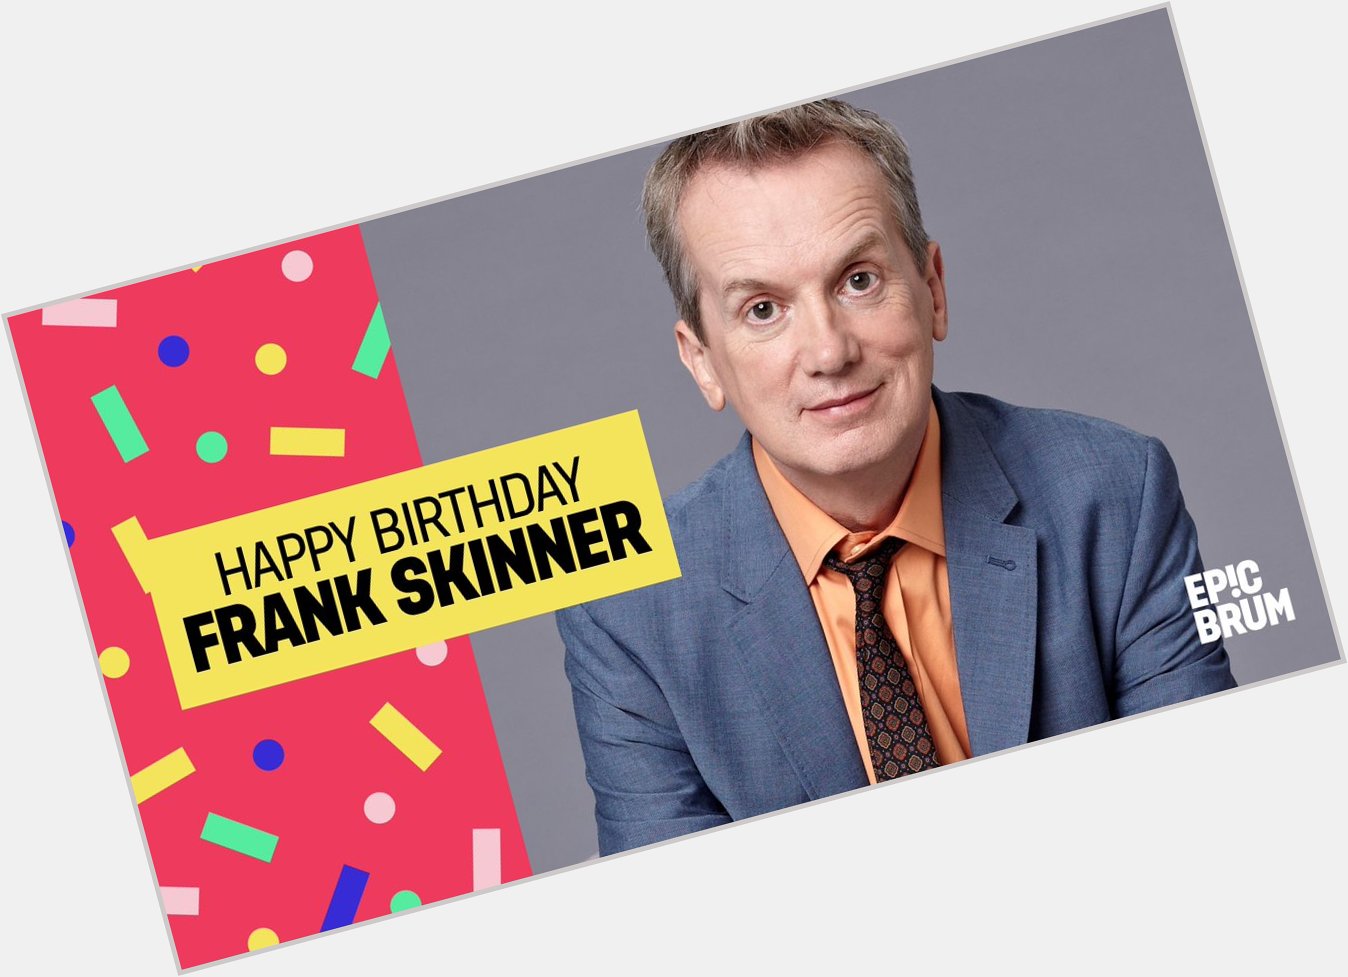  EP!C BIRTHDAY Wishing the one and only Funtime Frankie, Frank Skinner, a very happy birthday today! 